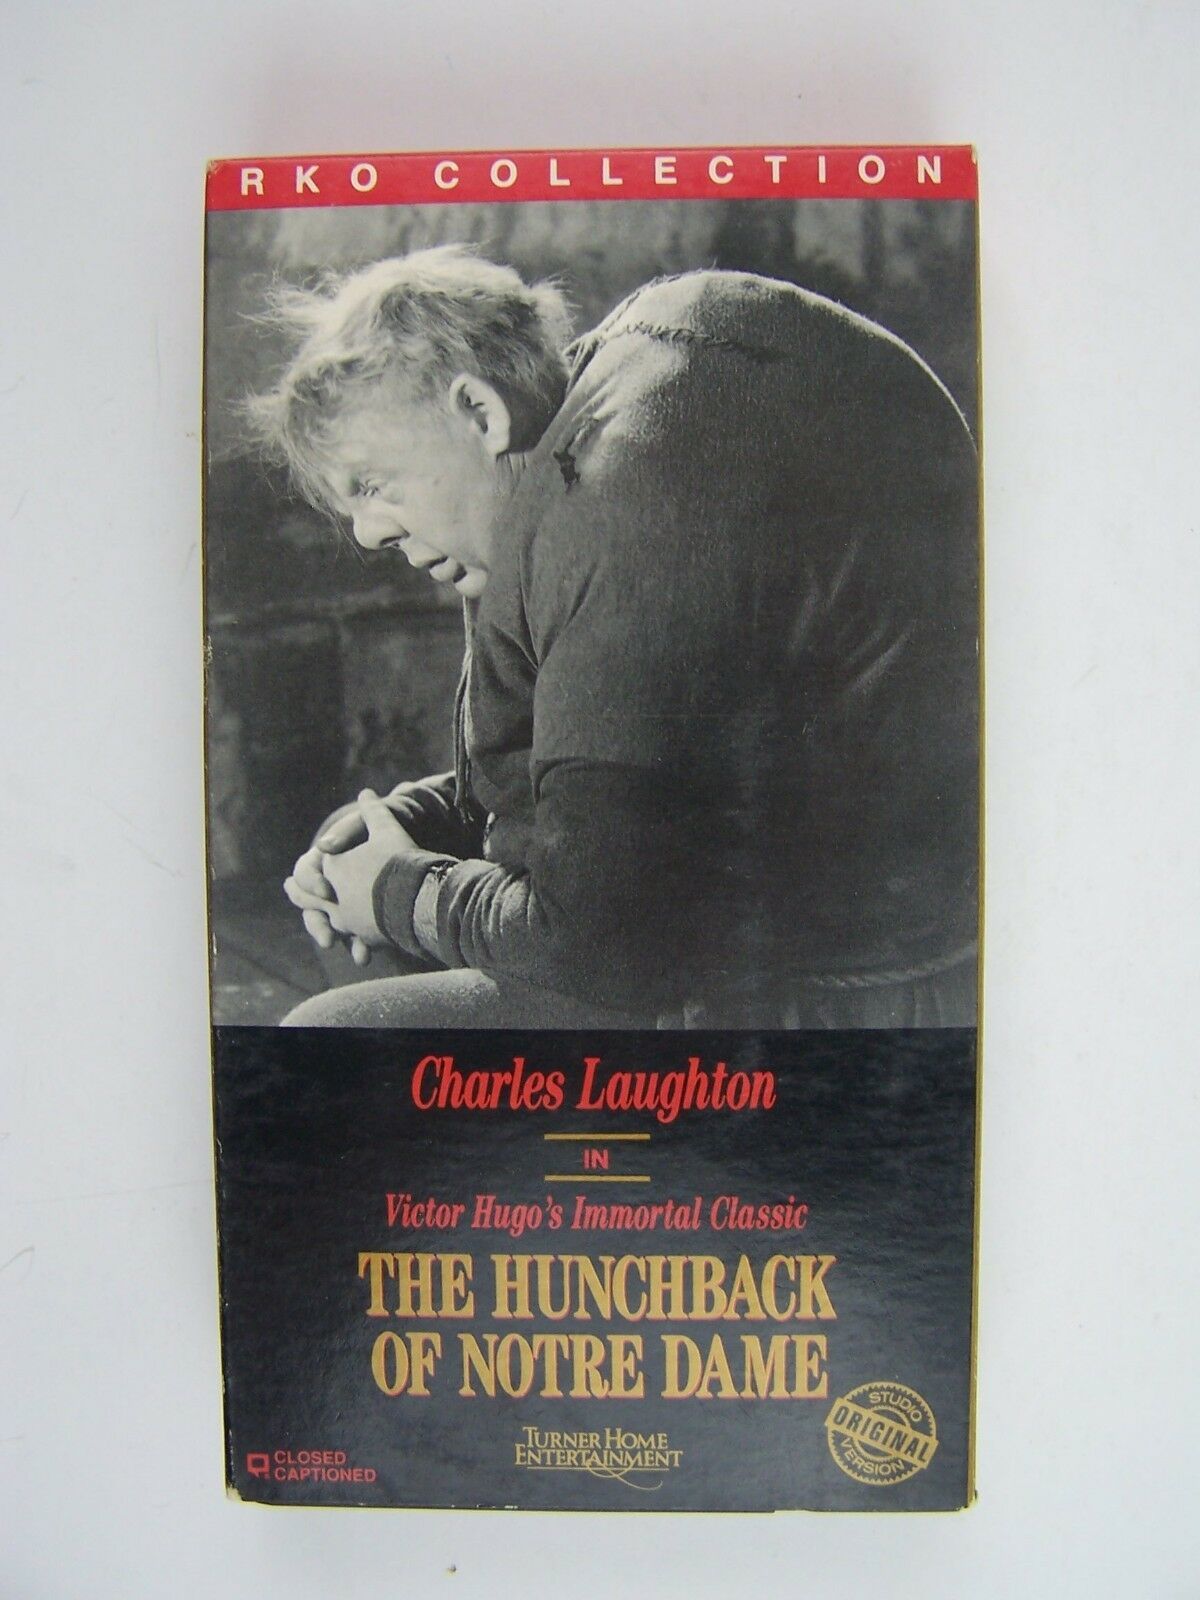 Primary image for The Hunchback of Notre Dame VHS 1939 Charles Laughton, Maureen O'Hara